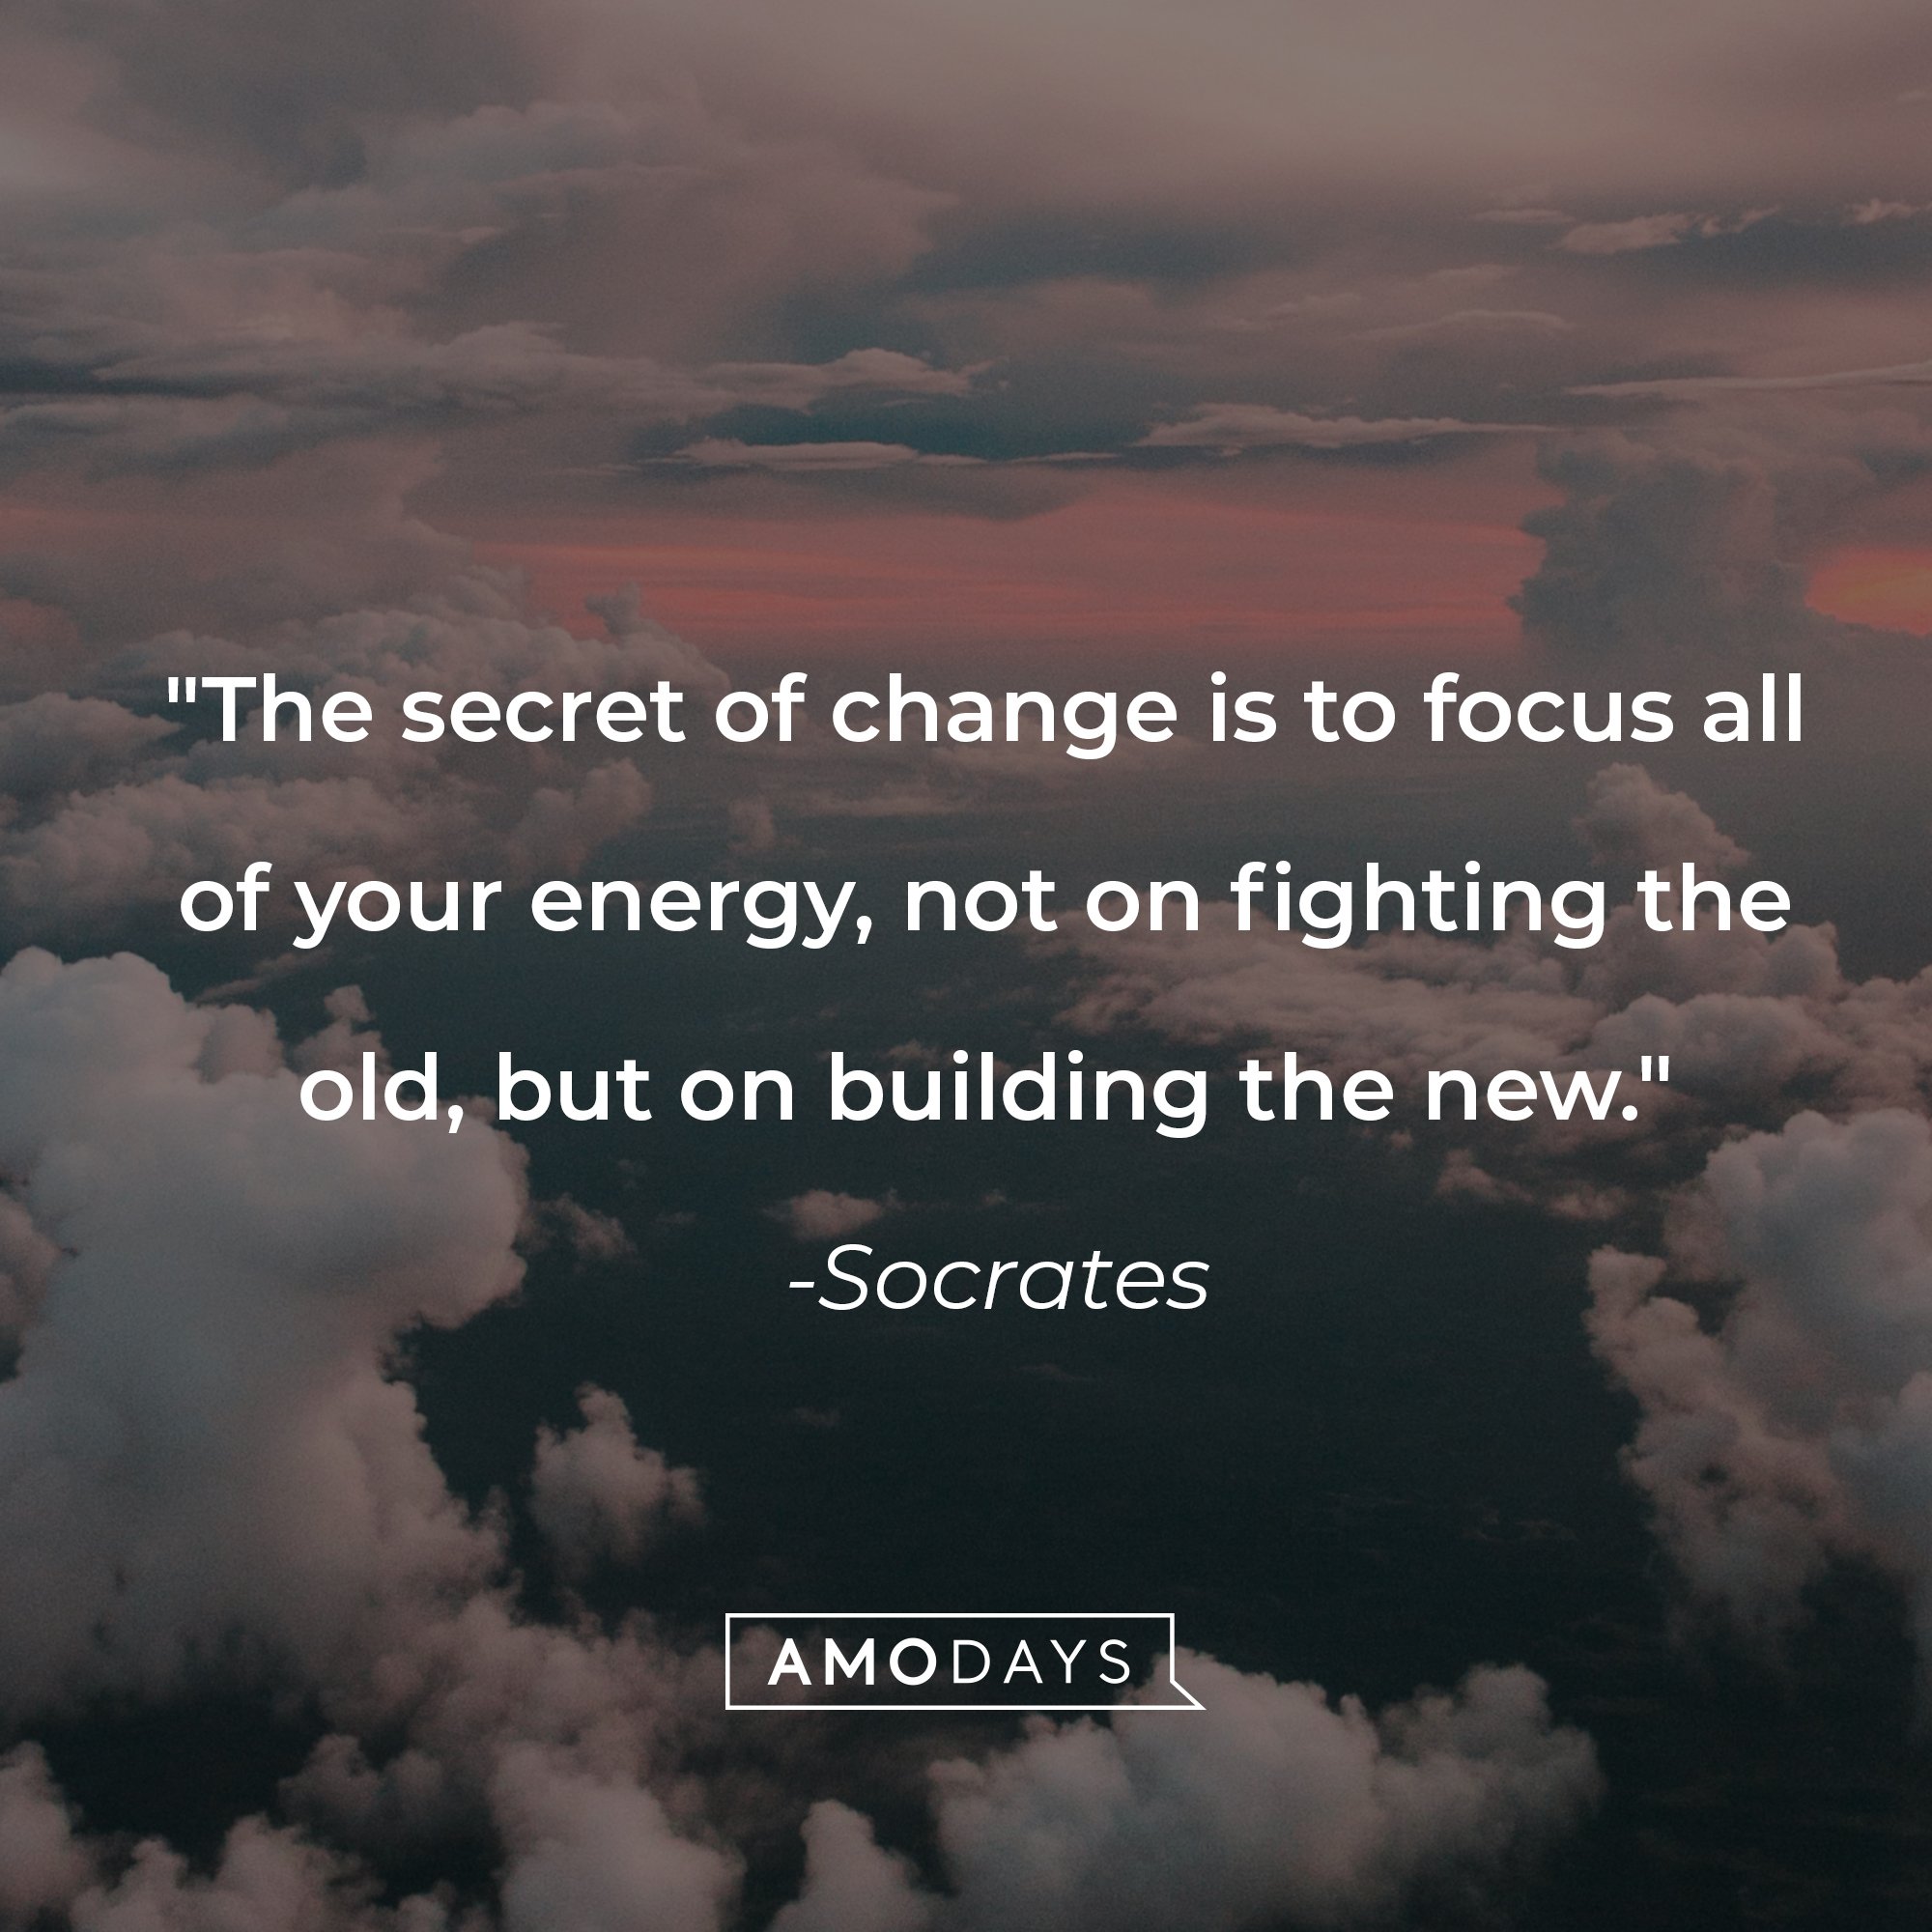 Socrates' quote: "The secret of change is to focus all of your energy, not on fighting the old, but on building the new." | Image: AmoDays